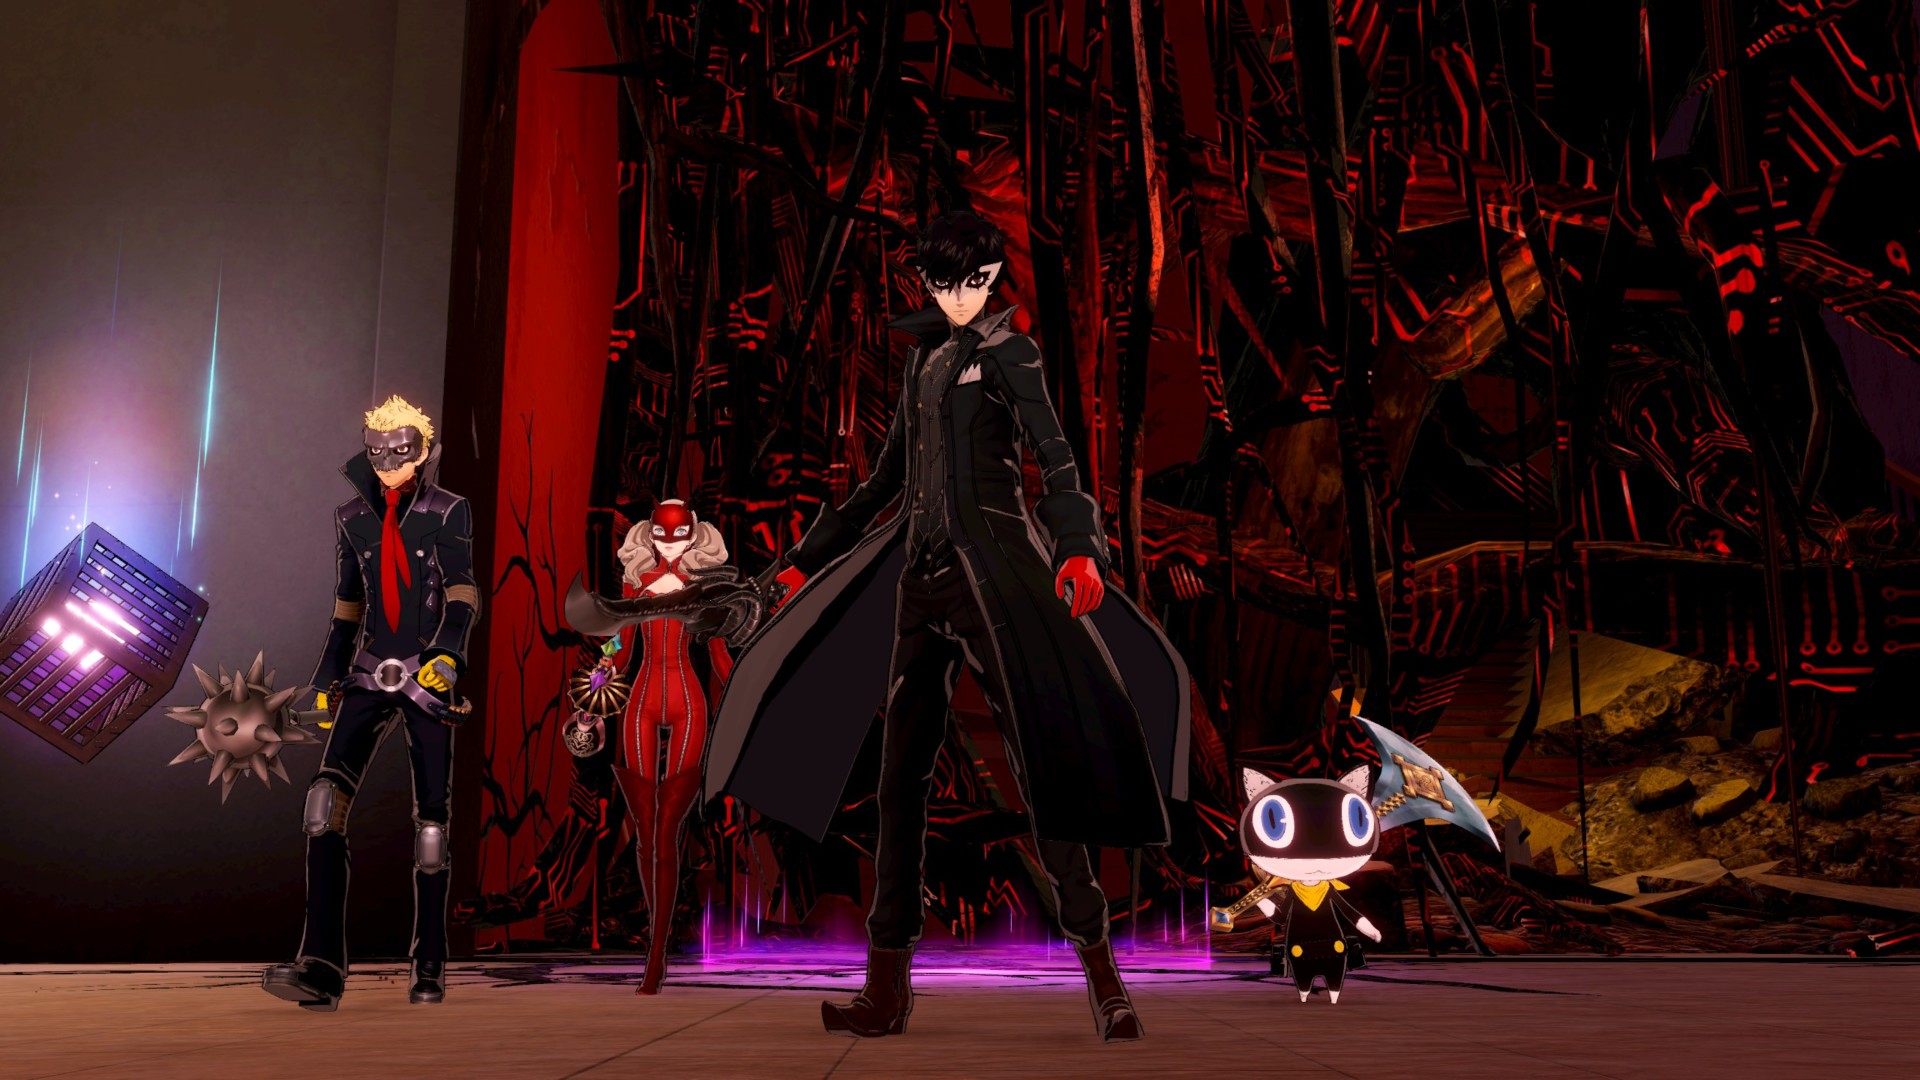 Persona 5 Strikers guide: Ultimate weapon locations